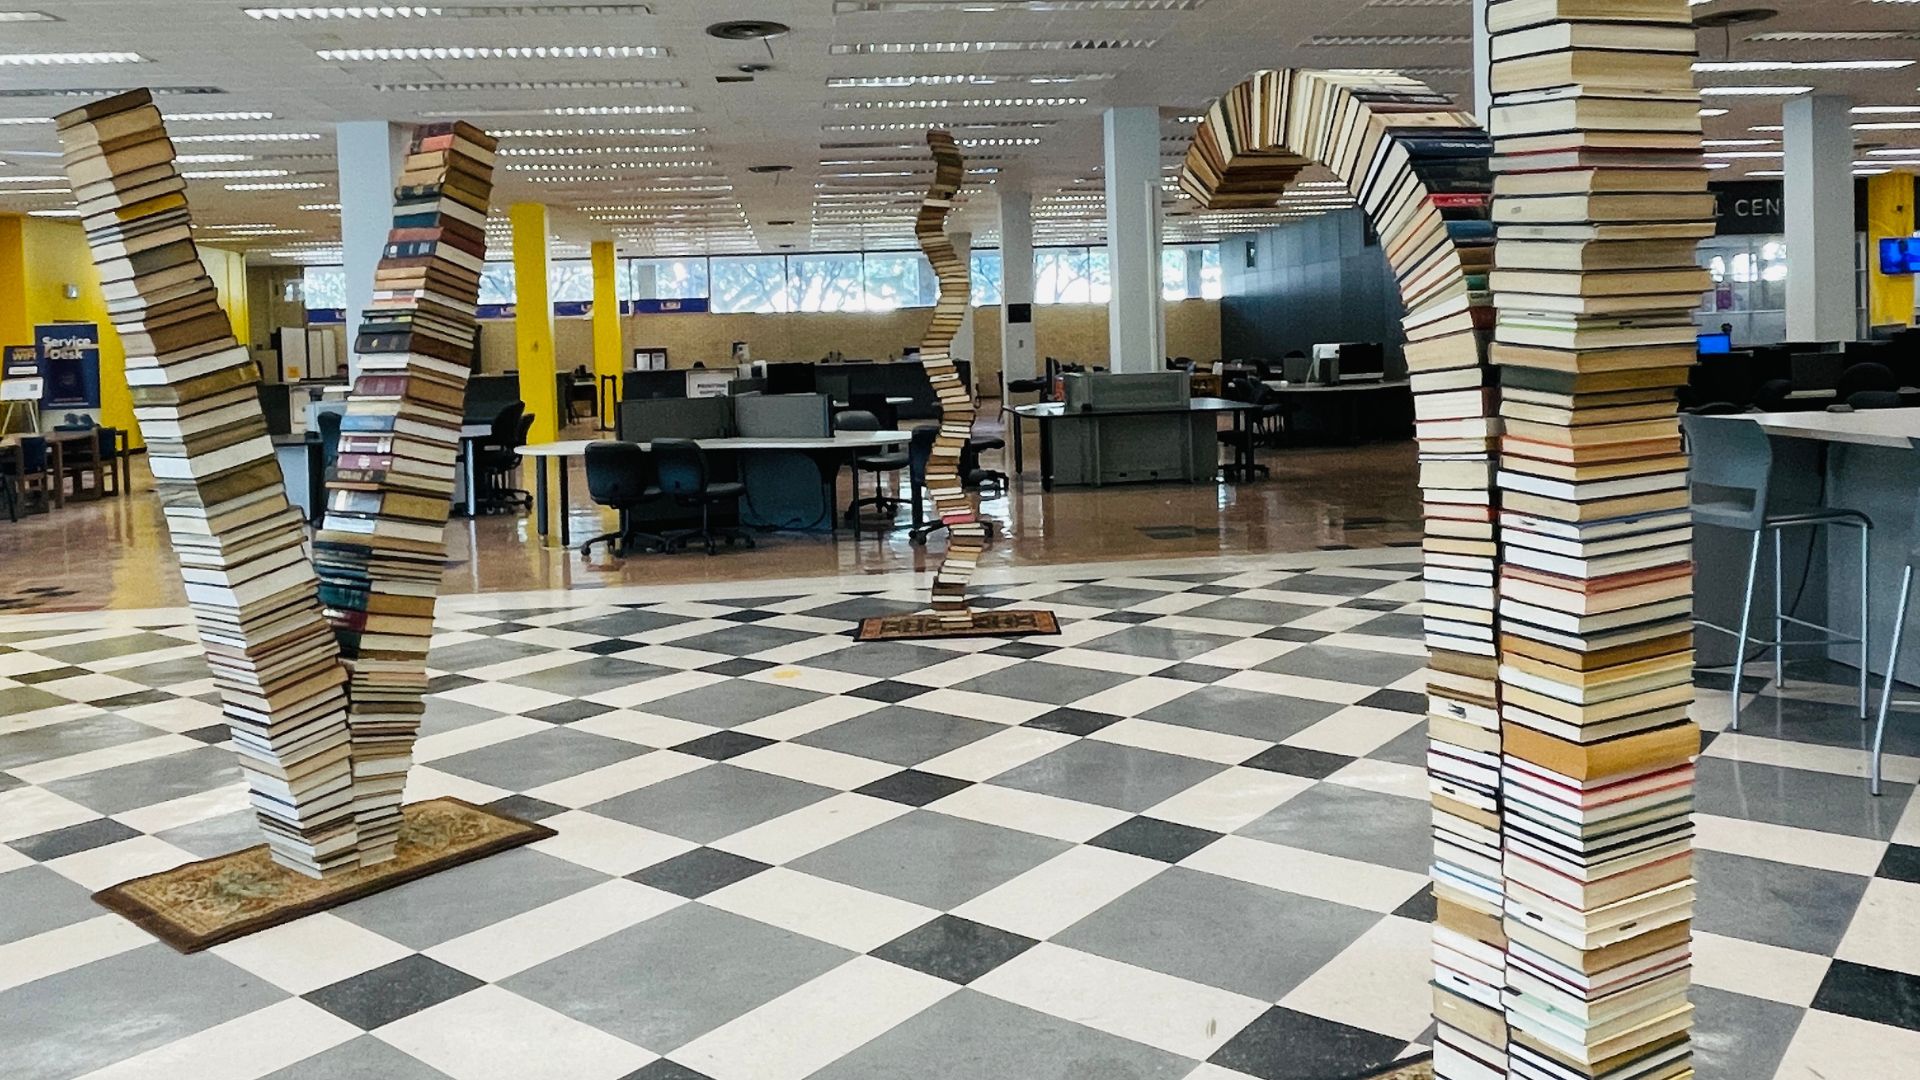 image of three book sculptures in the main library